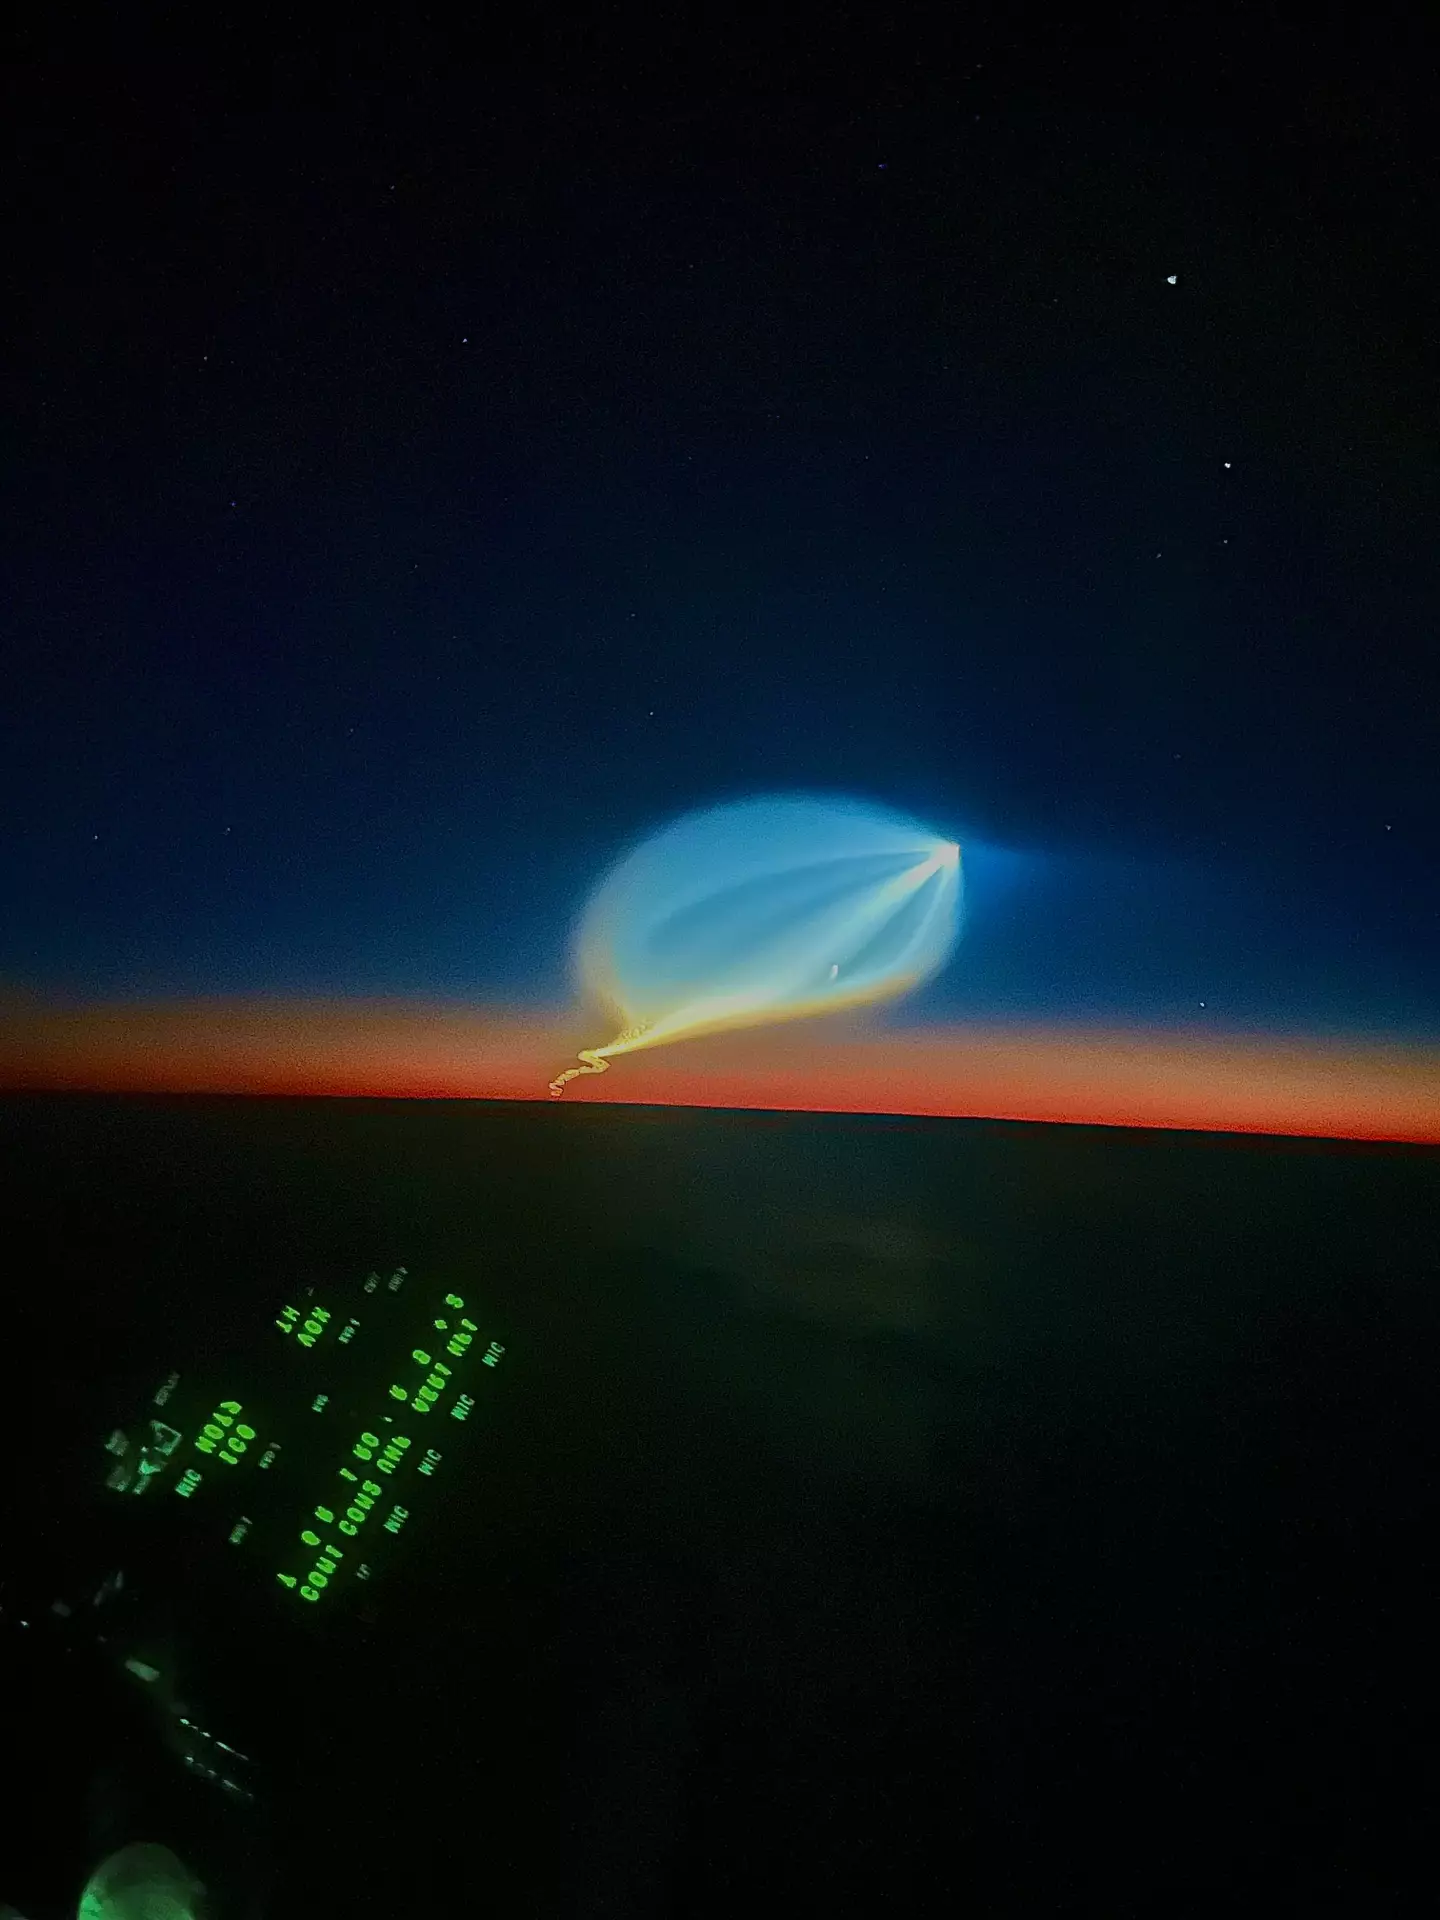 The US Air Force crew grabbed a few snaps of the fascinating light.